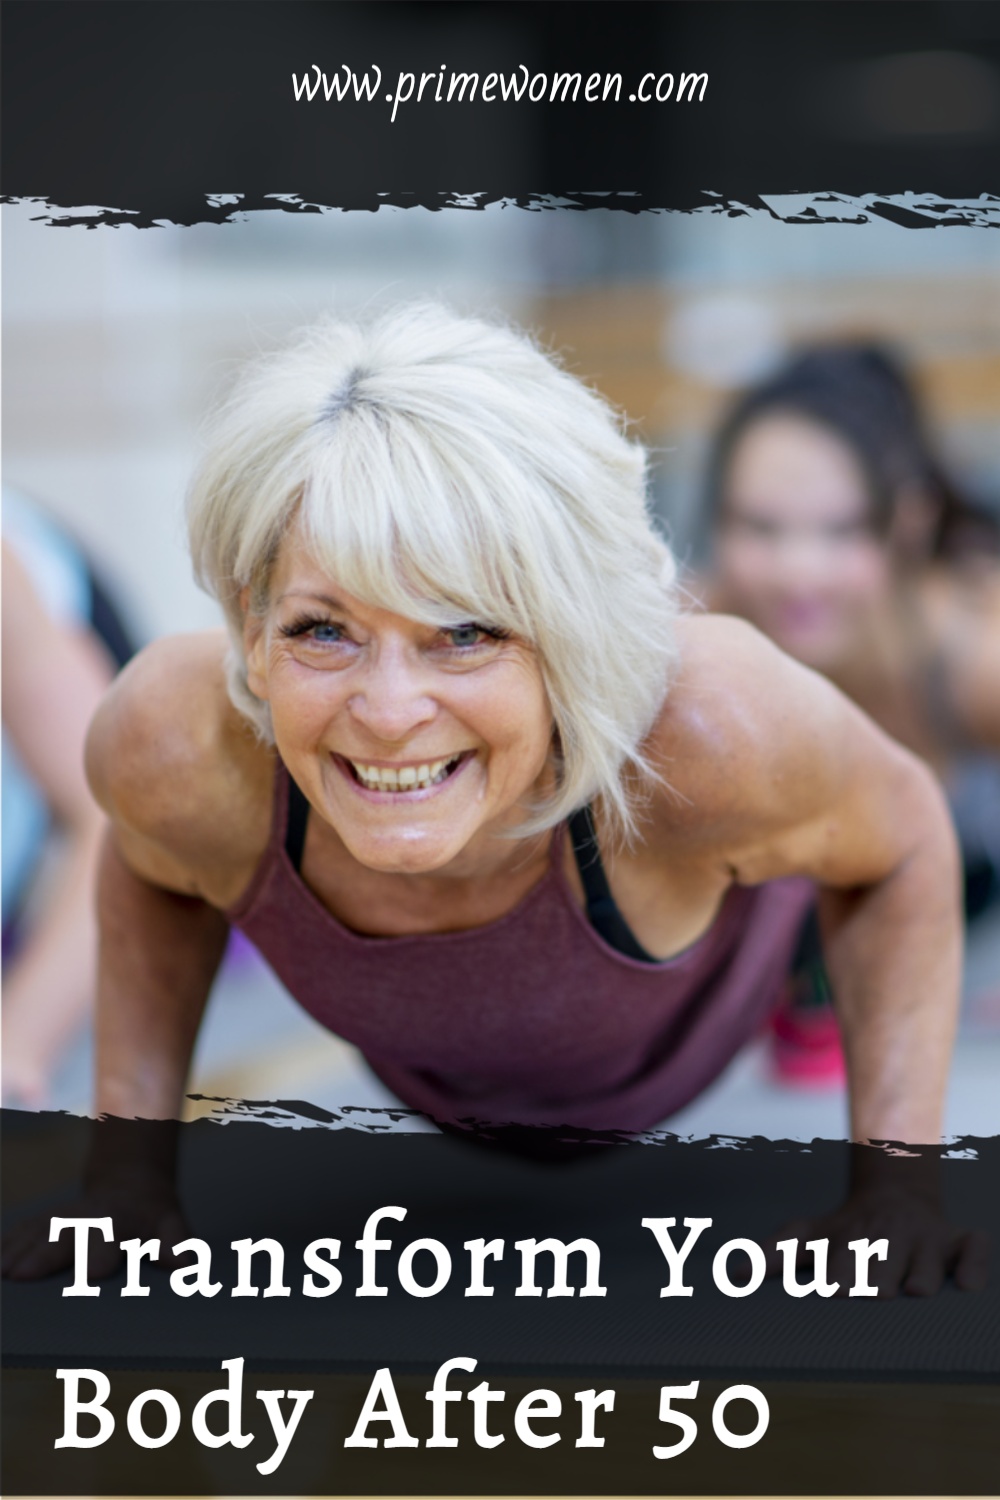 Learn how to transform your body after 50